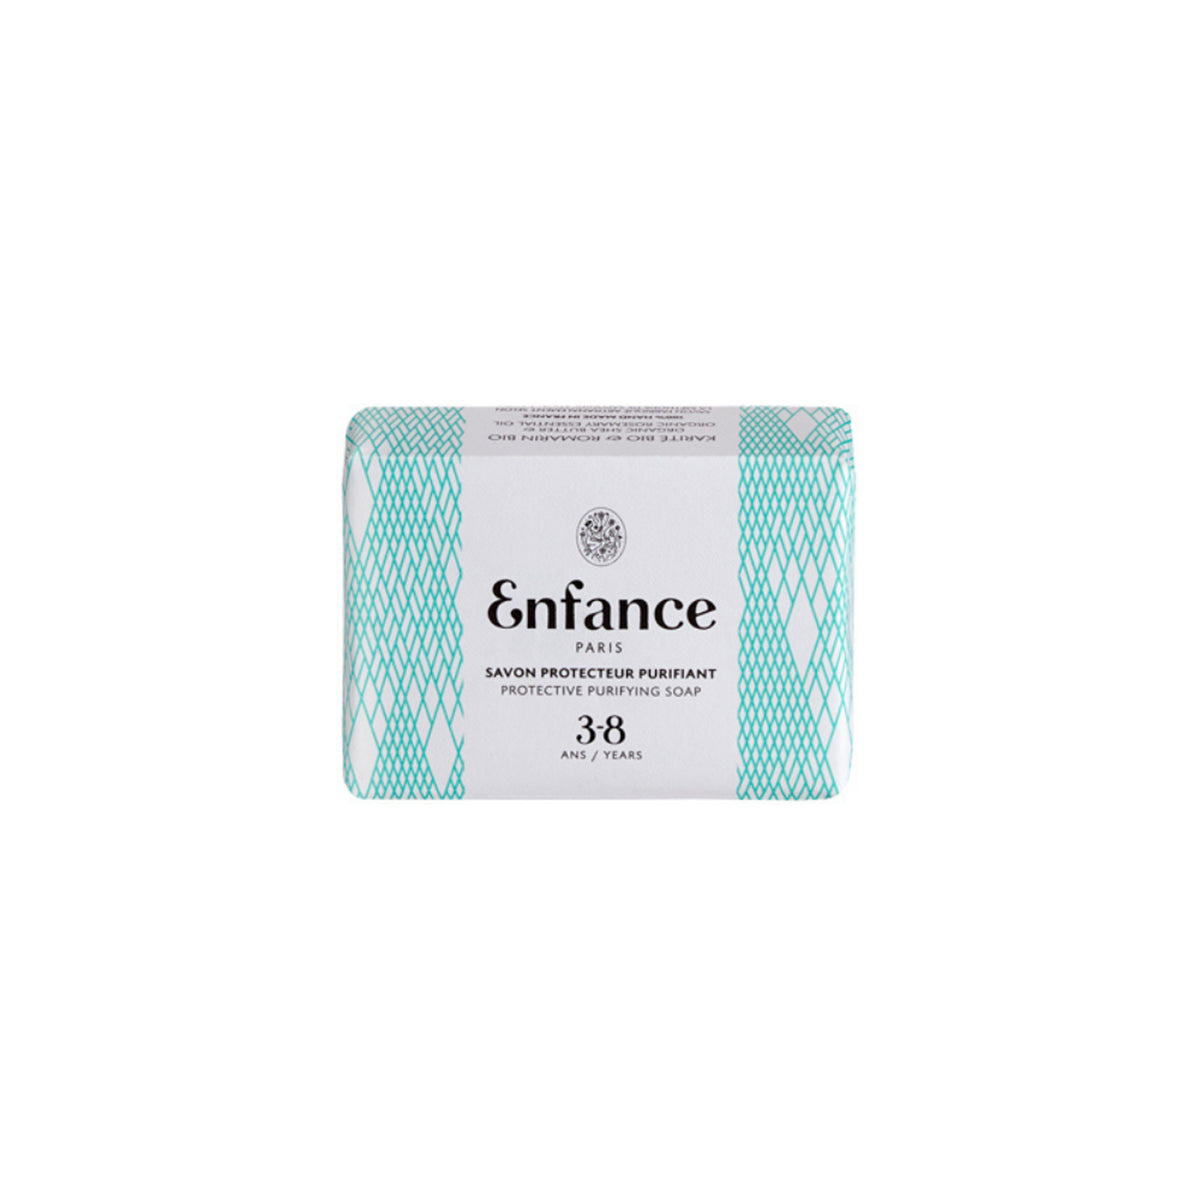 Enfance Paris 3-8 Years Protective Purifying Soap